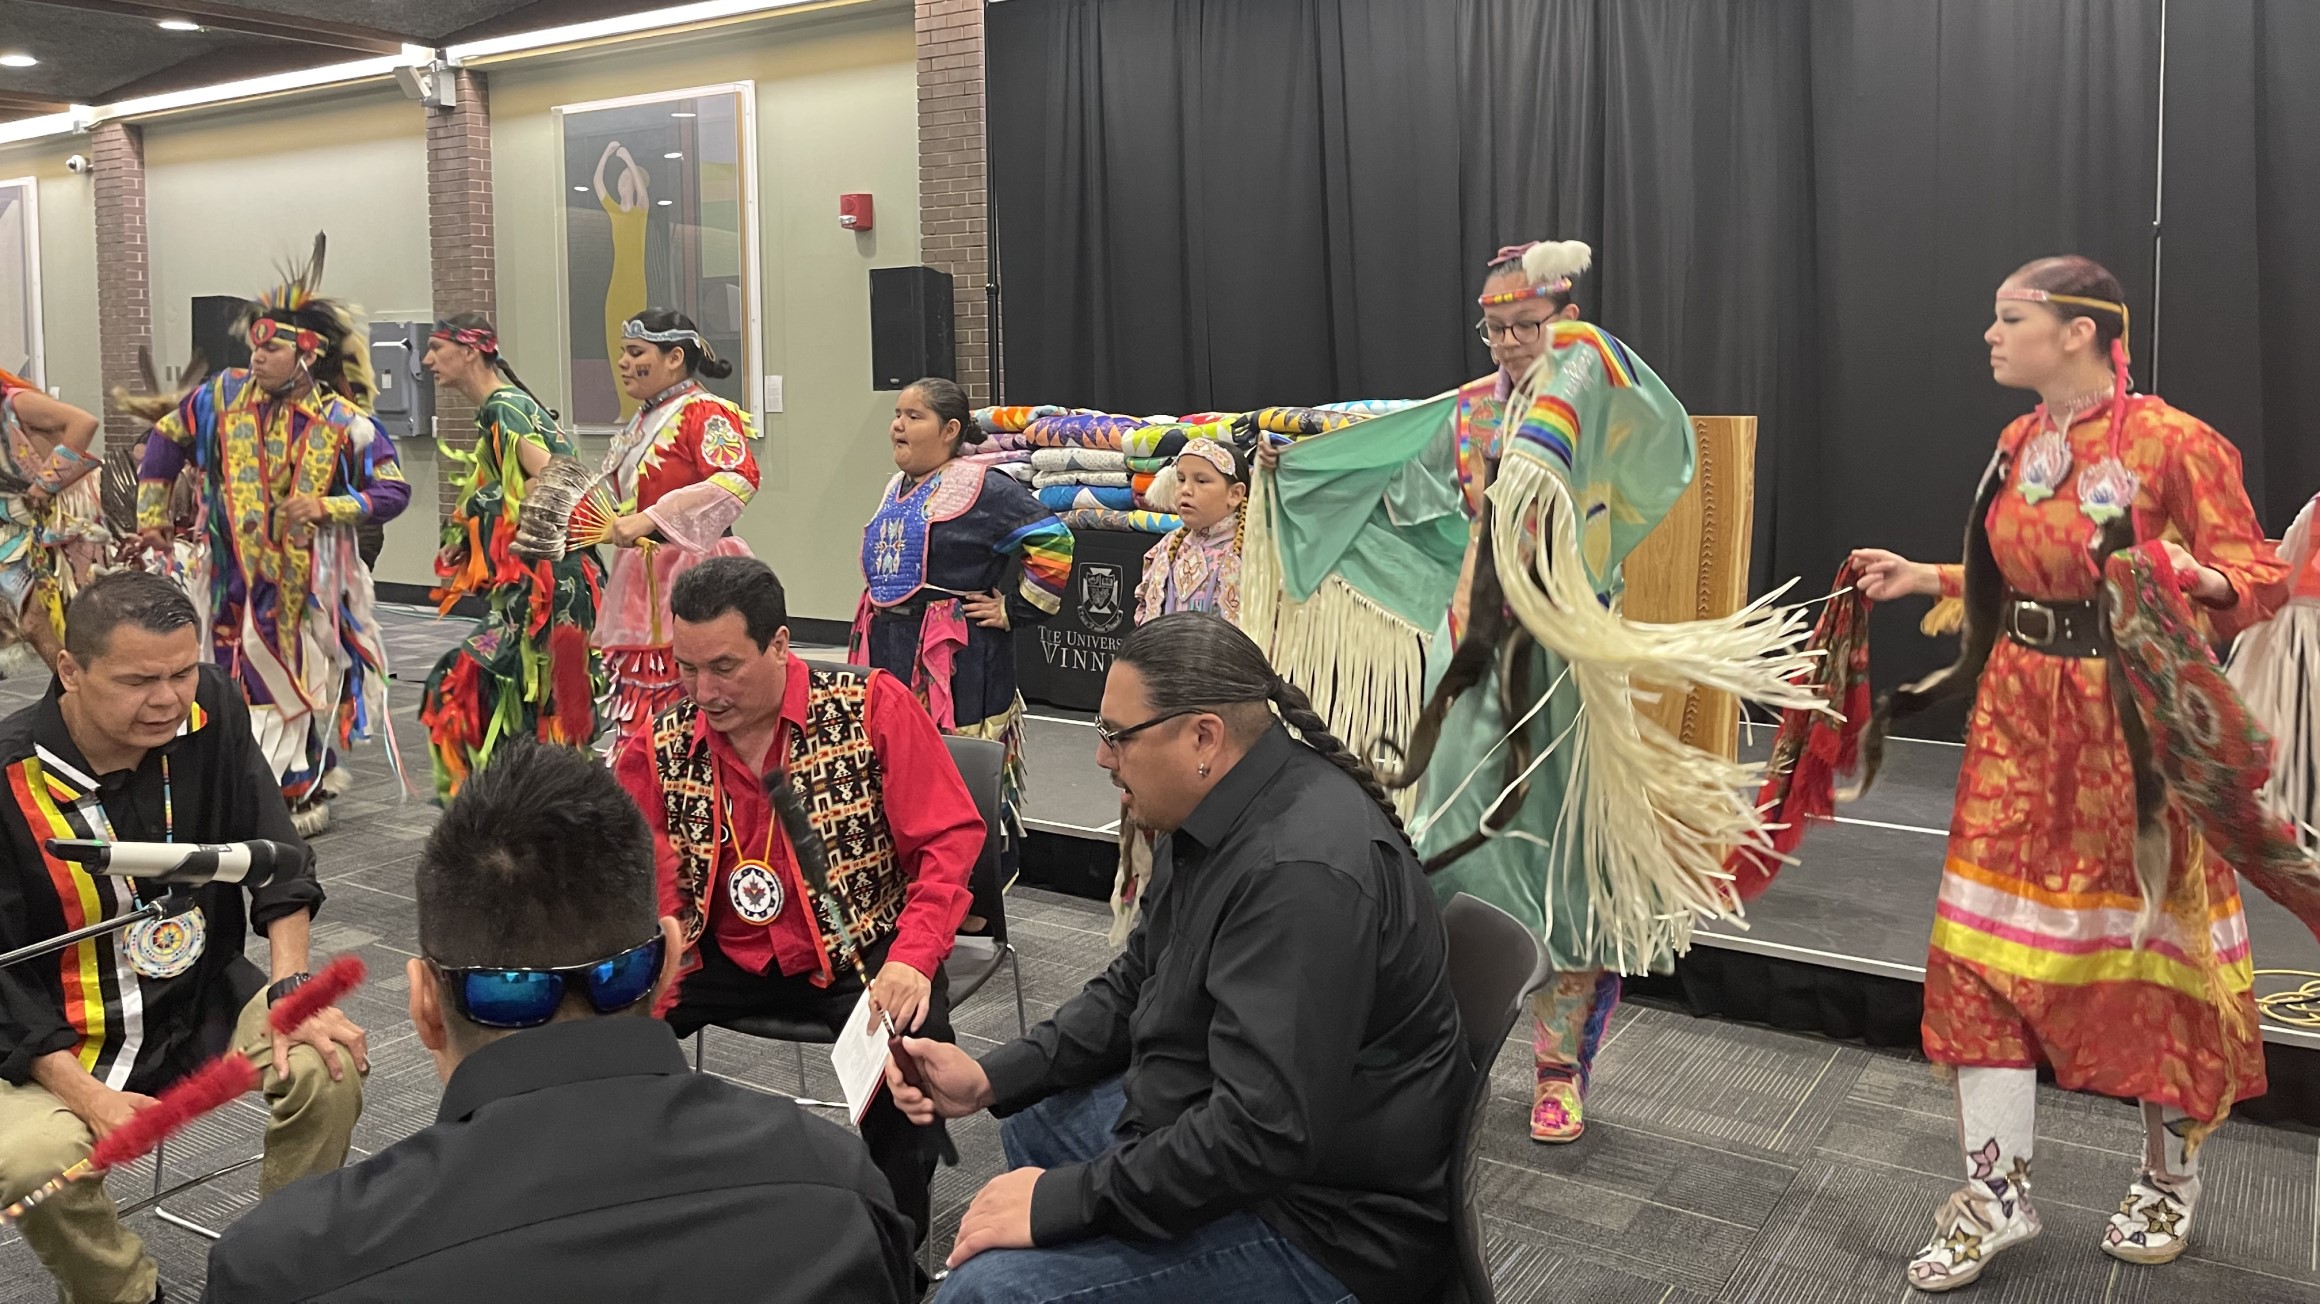 UWinnipeg hosts a range of events related to Indigenous history, culture, art